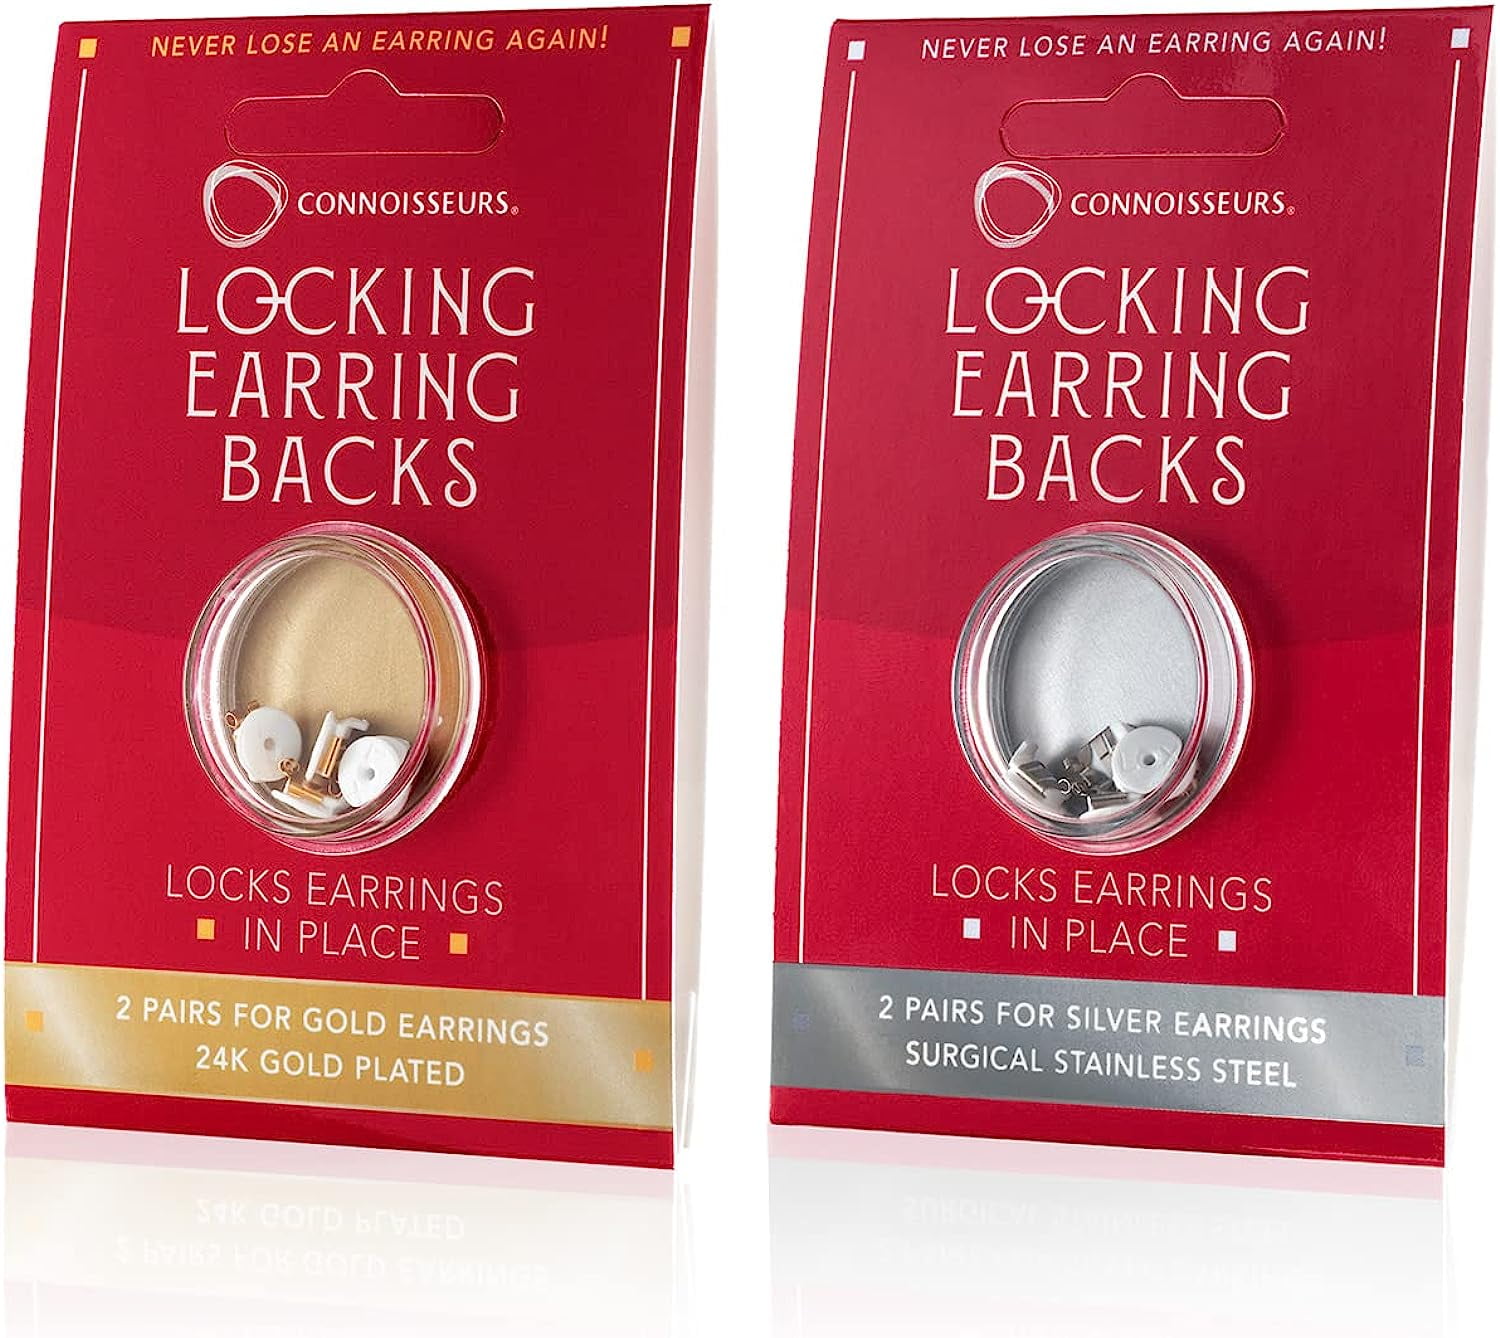 Shop Secure Locking Earrings with great discounts and prices